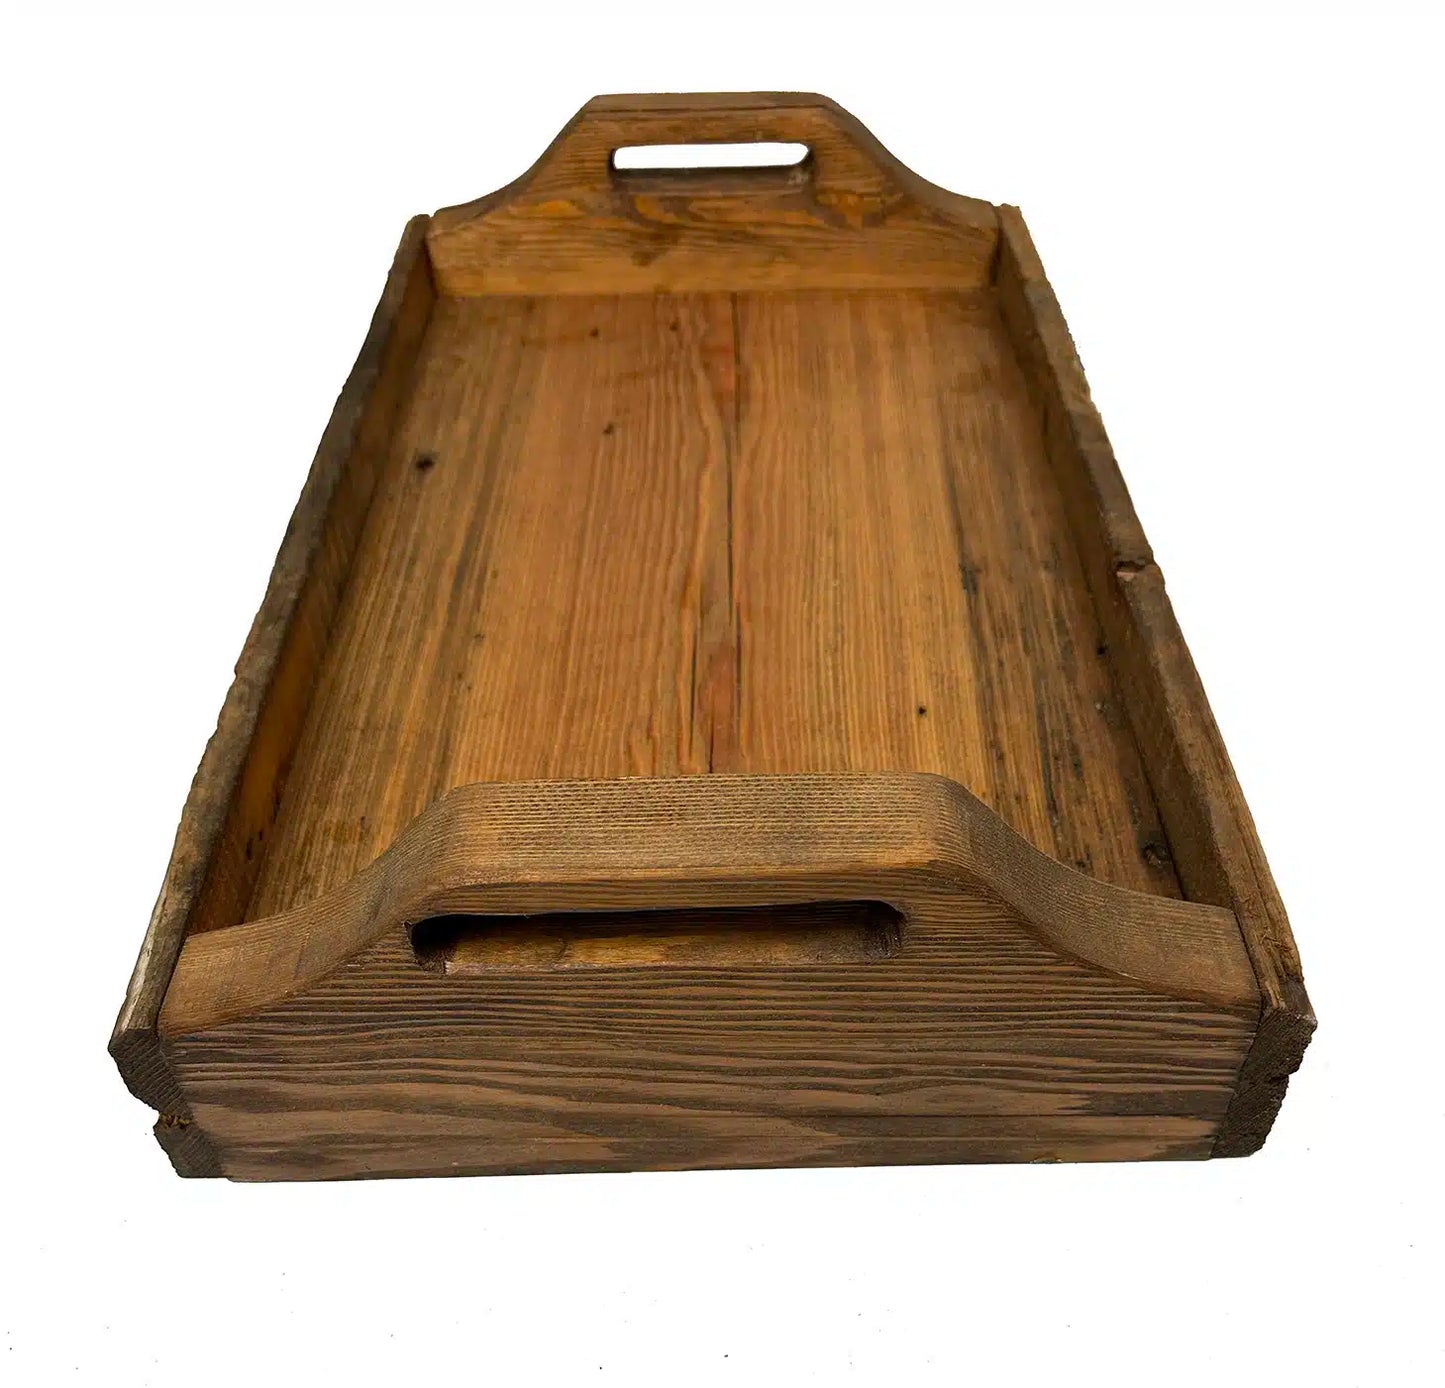 wood serving tray at a wider angle. In view is the handles, tray surface, and grain patterns displayed in the wood.